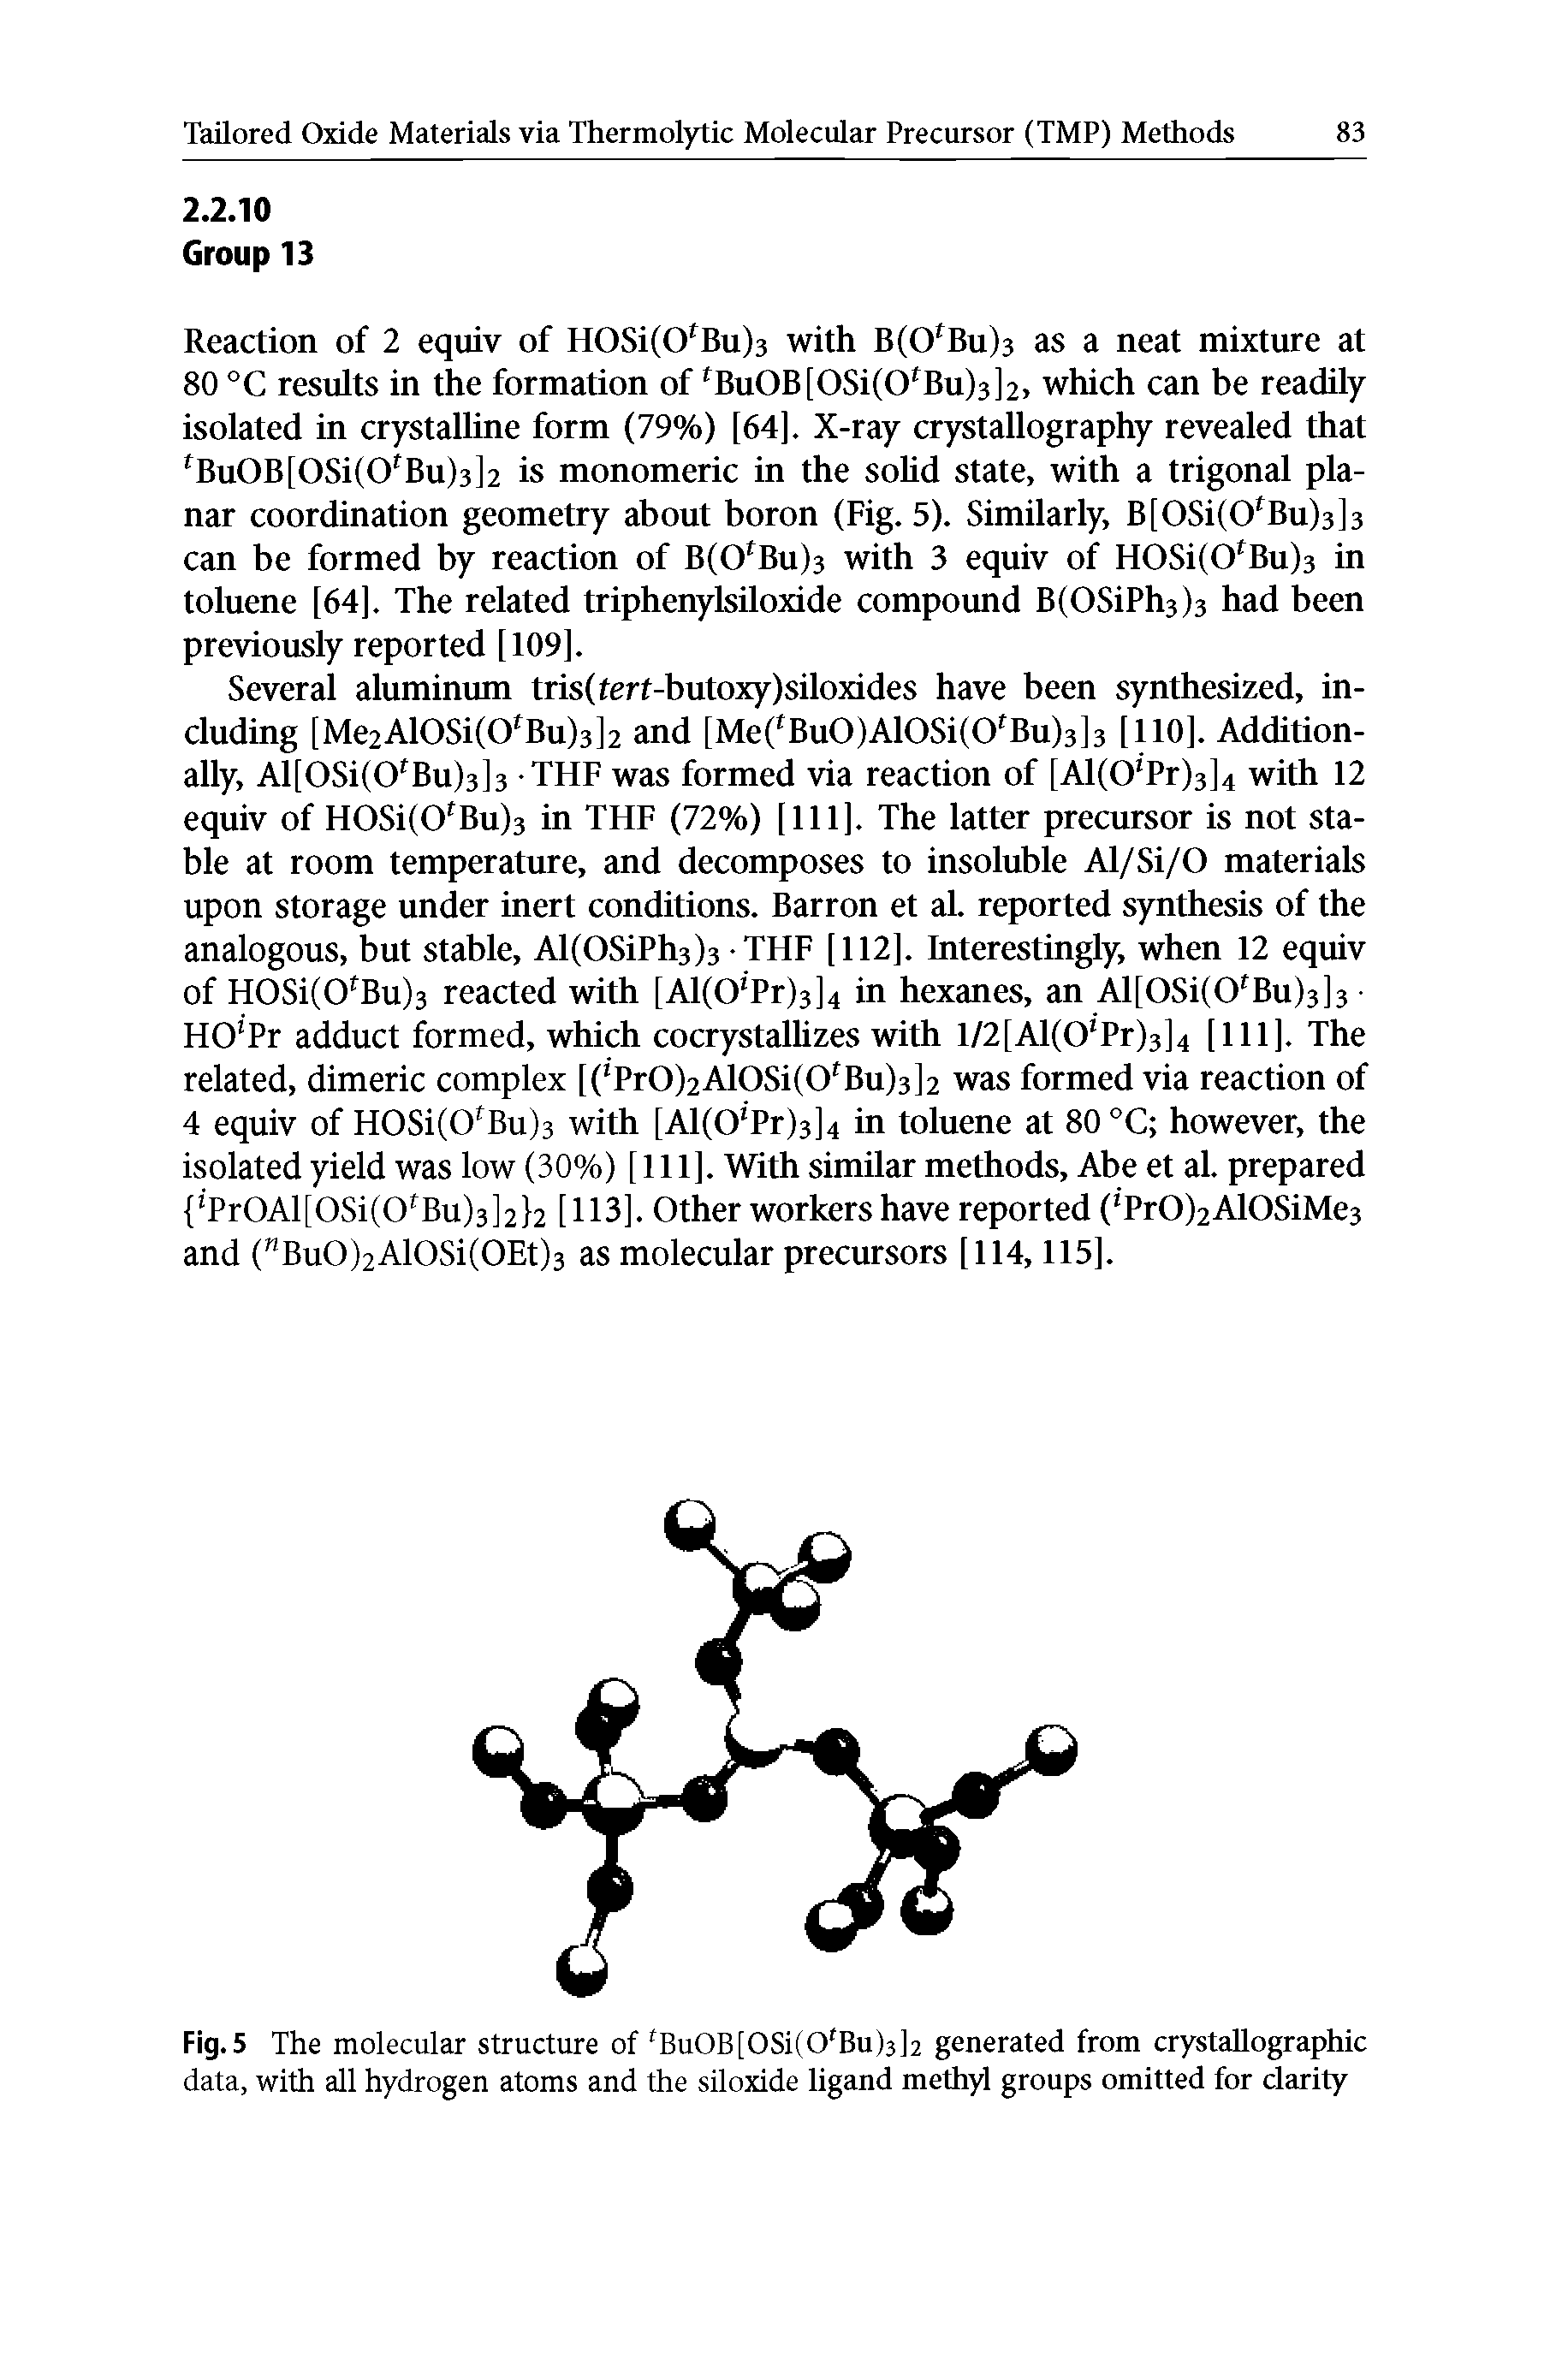 Fig. 5 The molecular structure of Bu0B[0Si(0 Bu)3]2 generated from crystallographic data, with all hydrogen atoms and the siloxide ligand methyl groups omitted for clarity...